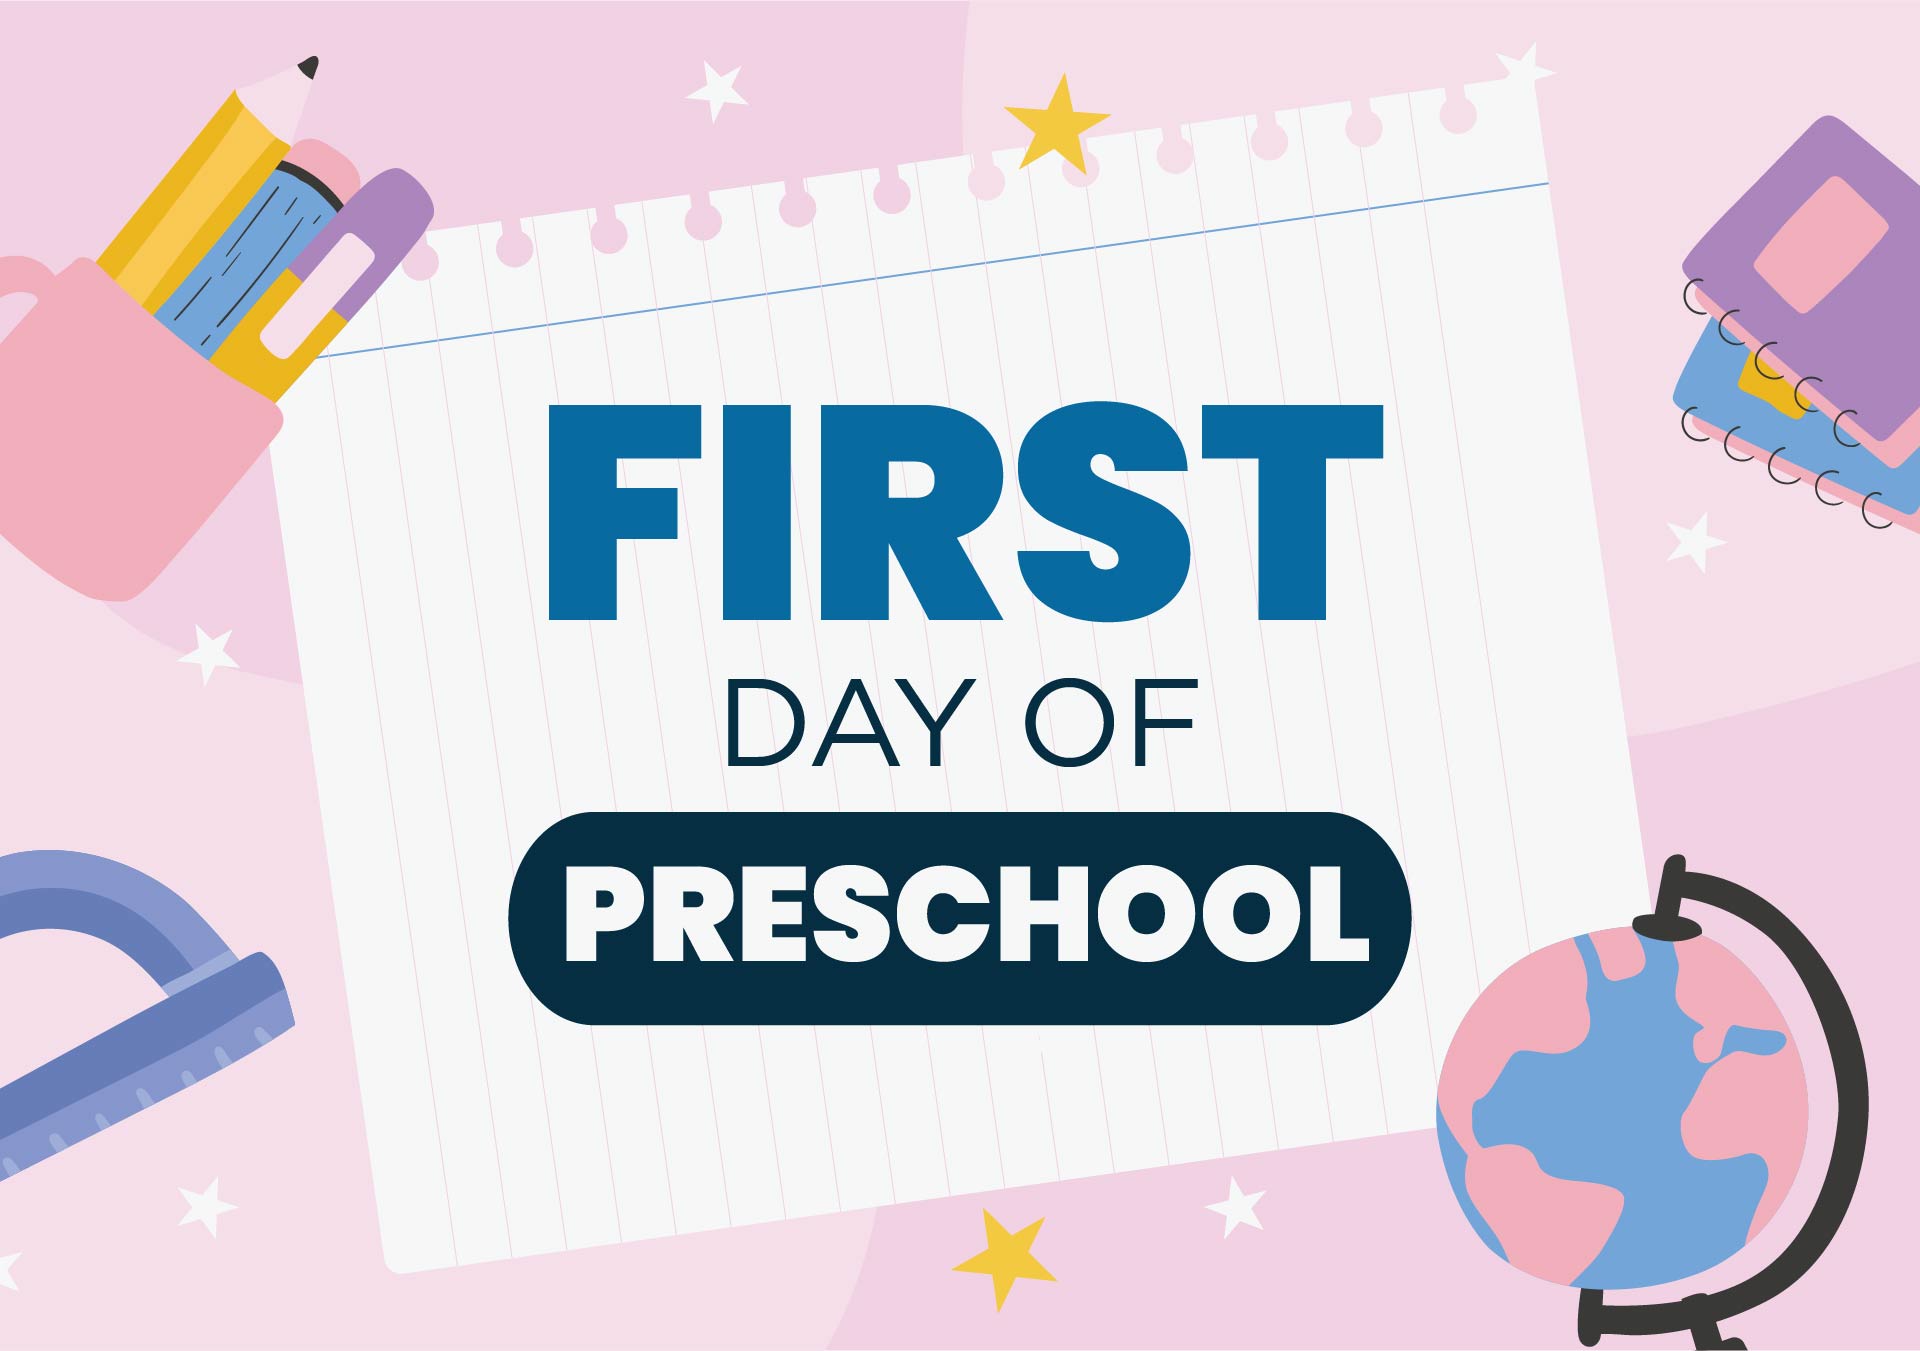 9-best-images-of-first-day-of-preschool-printable-first-day-of-preschool-sign-printable-first